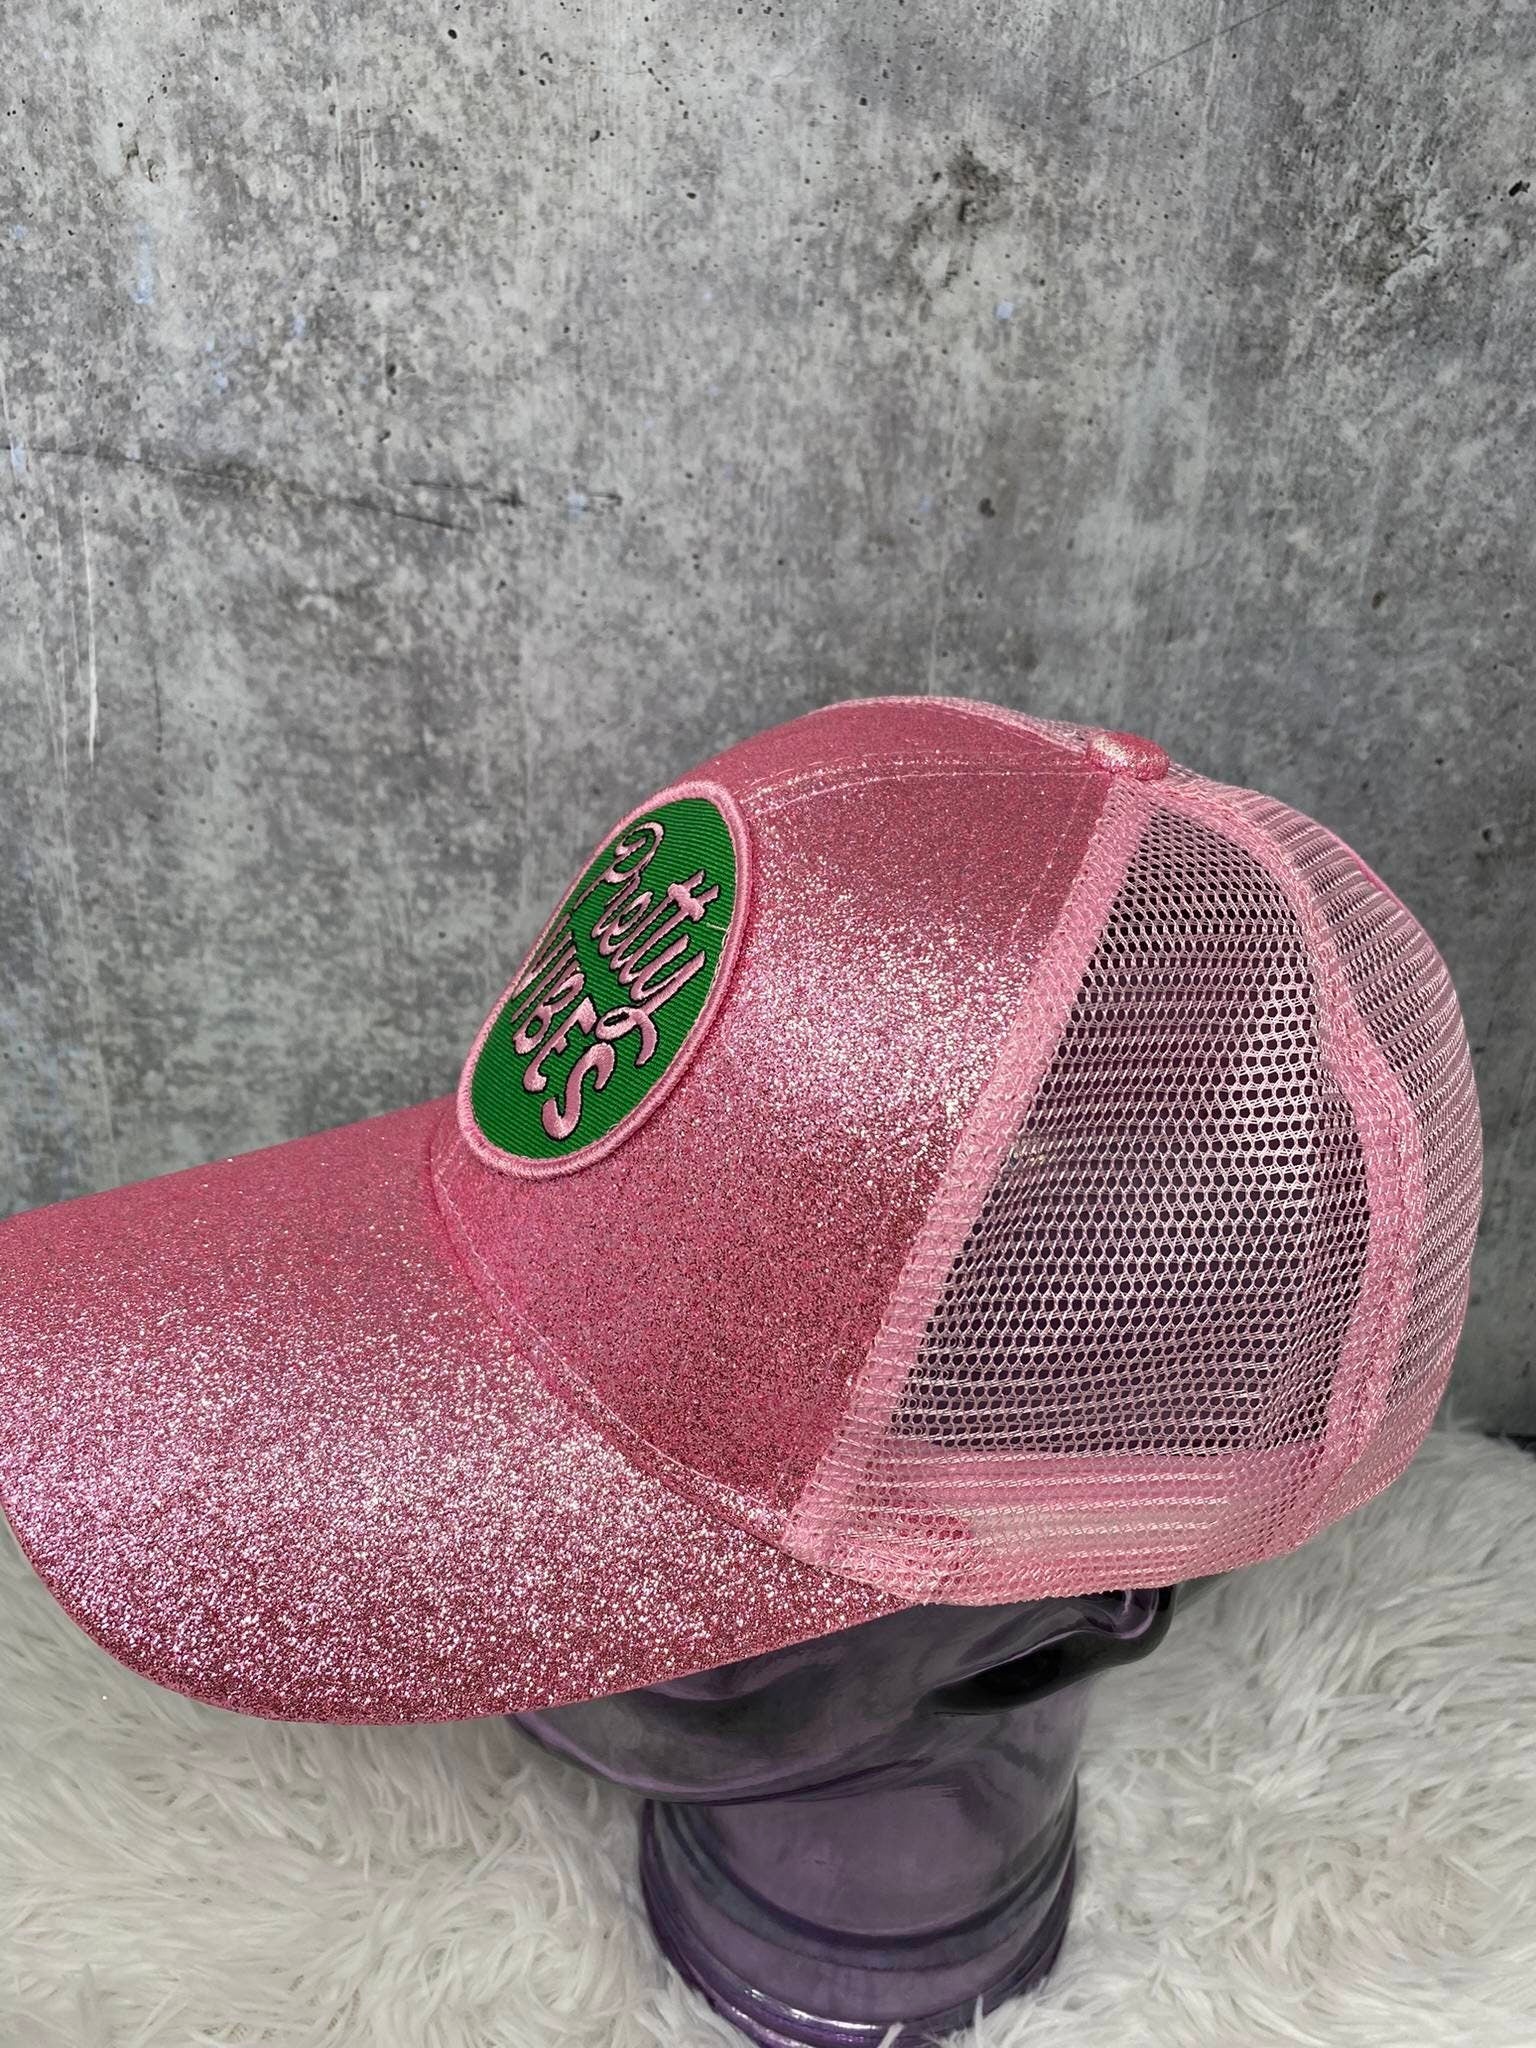 Pink & Green,"Pretty Vibes" Glitter Messy Bun/Ponytail Hat, Sparkling Bad Hair Day Hat, Gifts for Sorority Girl, Cute Summer Hat w/Patch